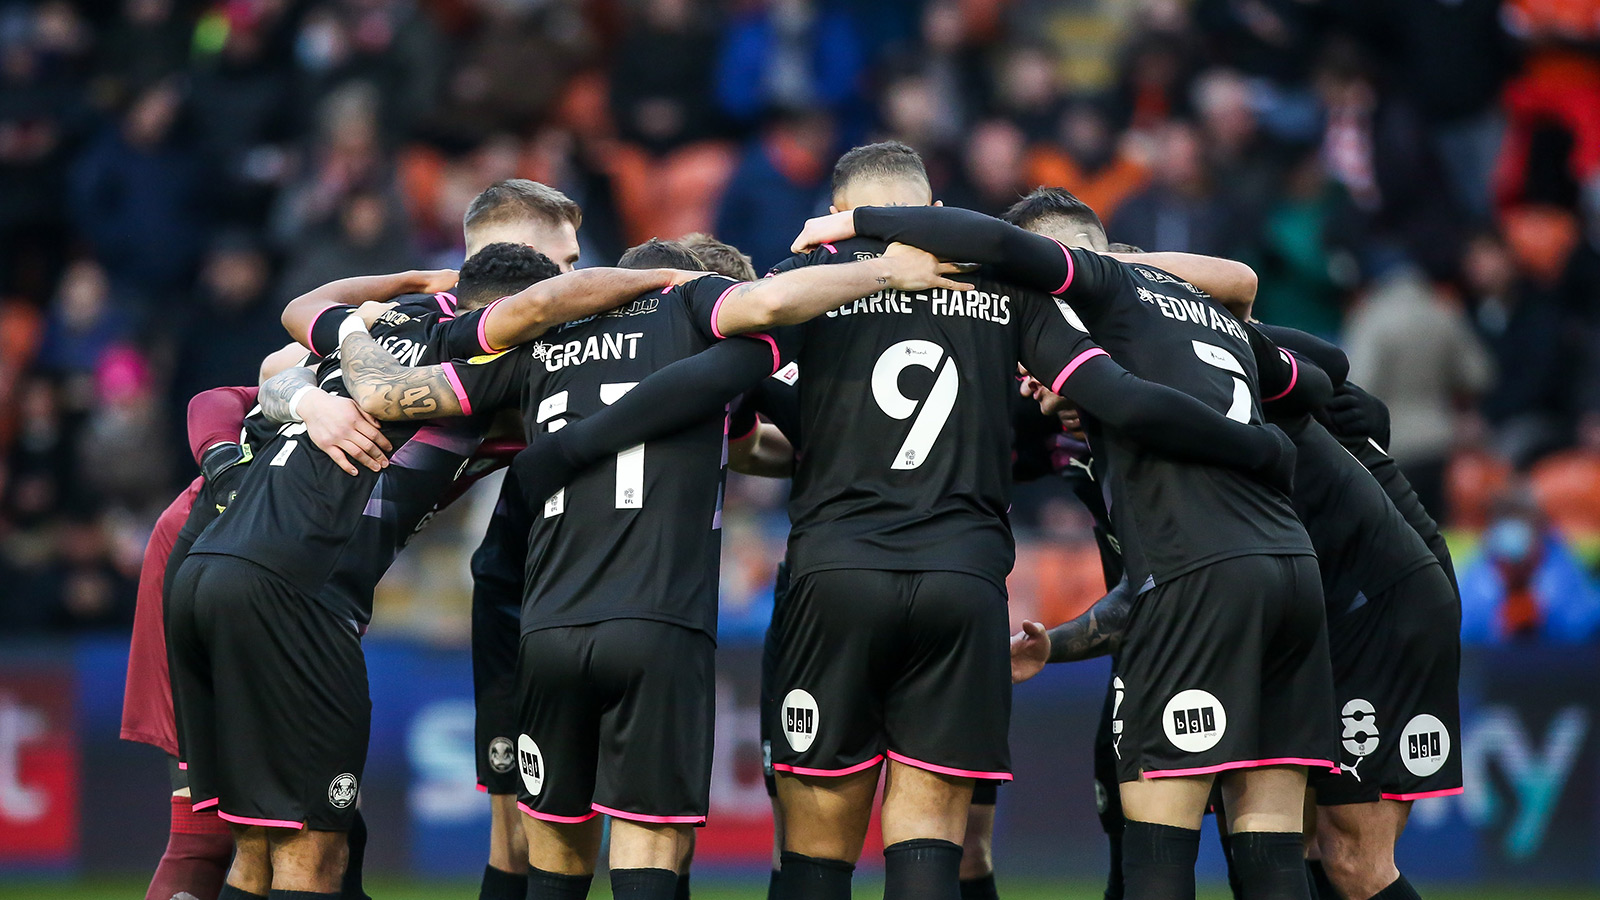 18th December '21 | 2021 ends in defeat at Blackpool, but in a year which saw the club win promotion, keep it Posh!